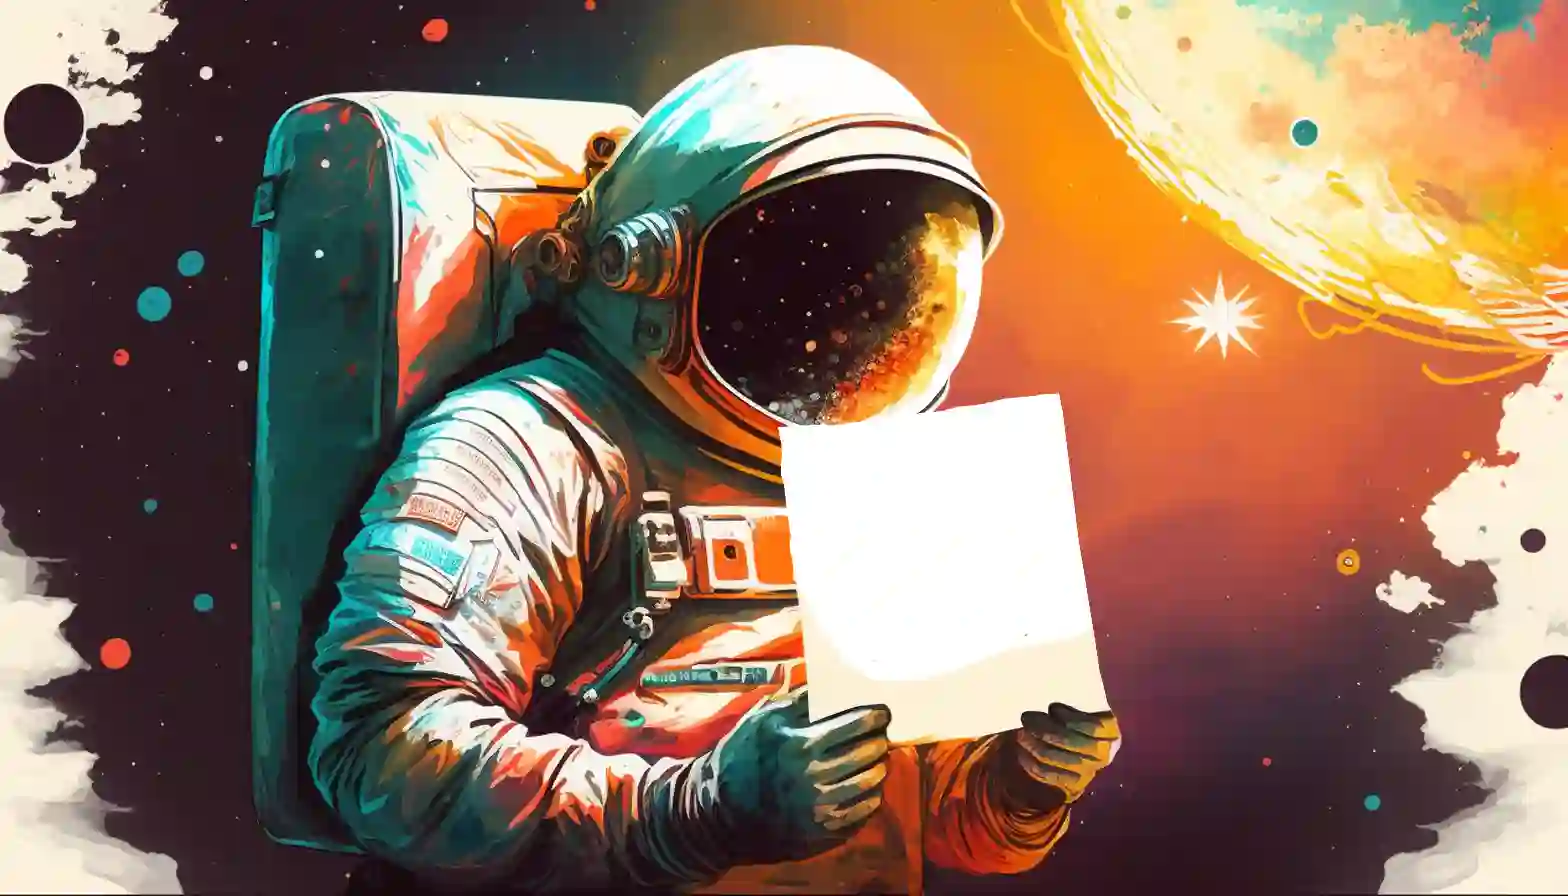 An astronaut, standing on a distant planet, proudly displays a cover letter, symbolizing how the James Innes Group's cover letter service can help you reach for the stars in your job search.